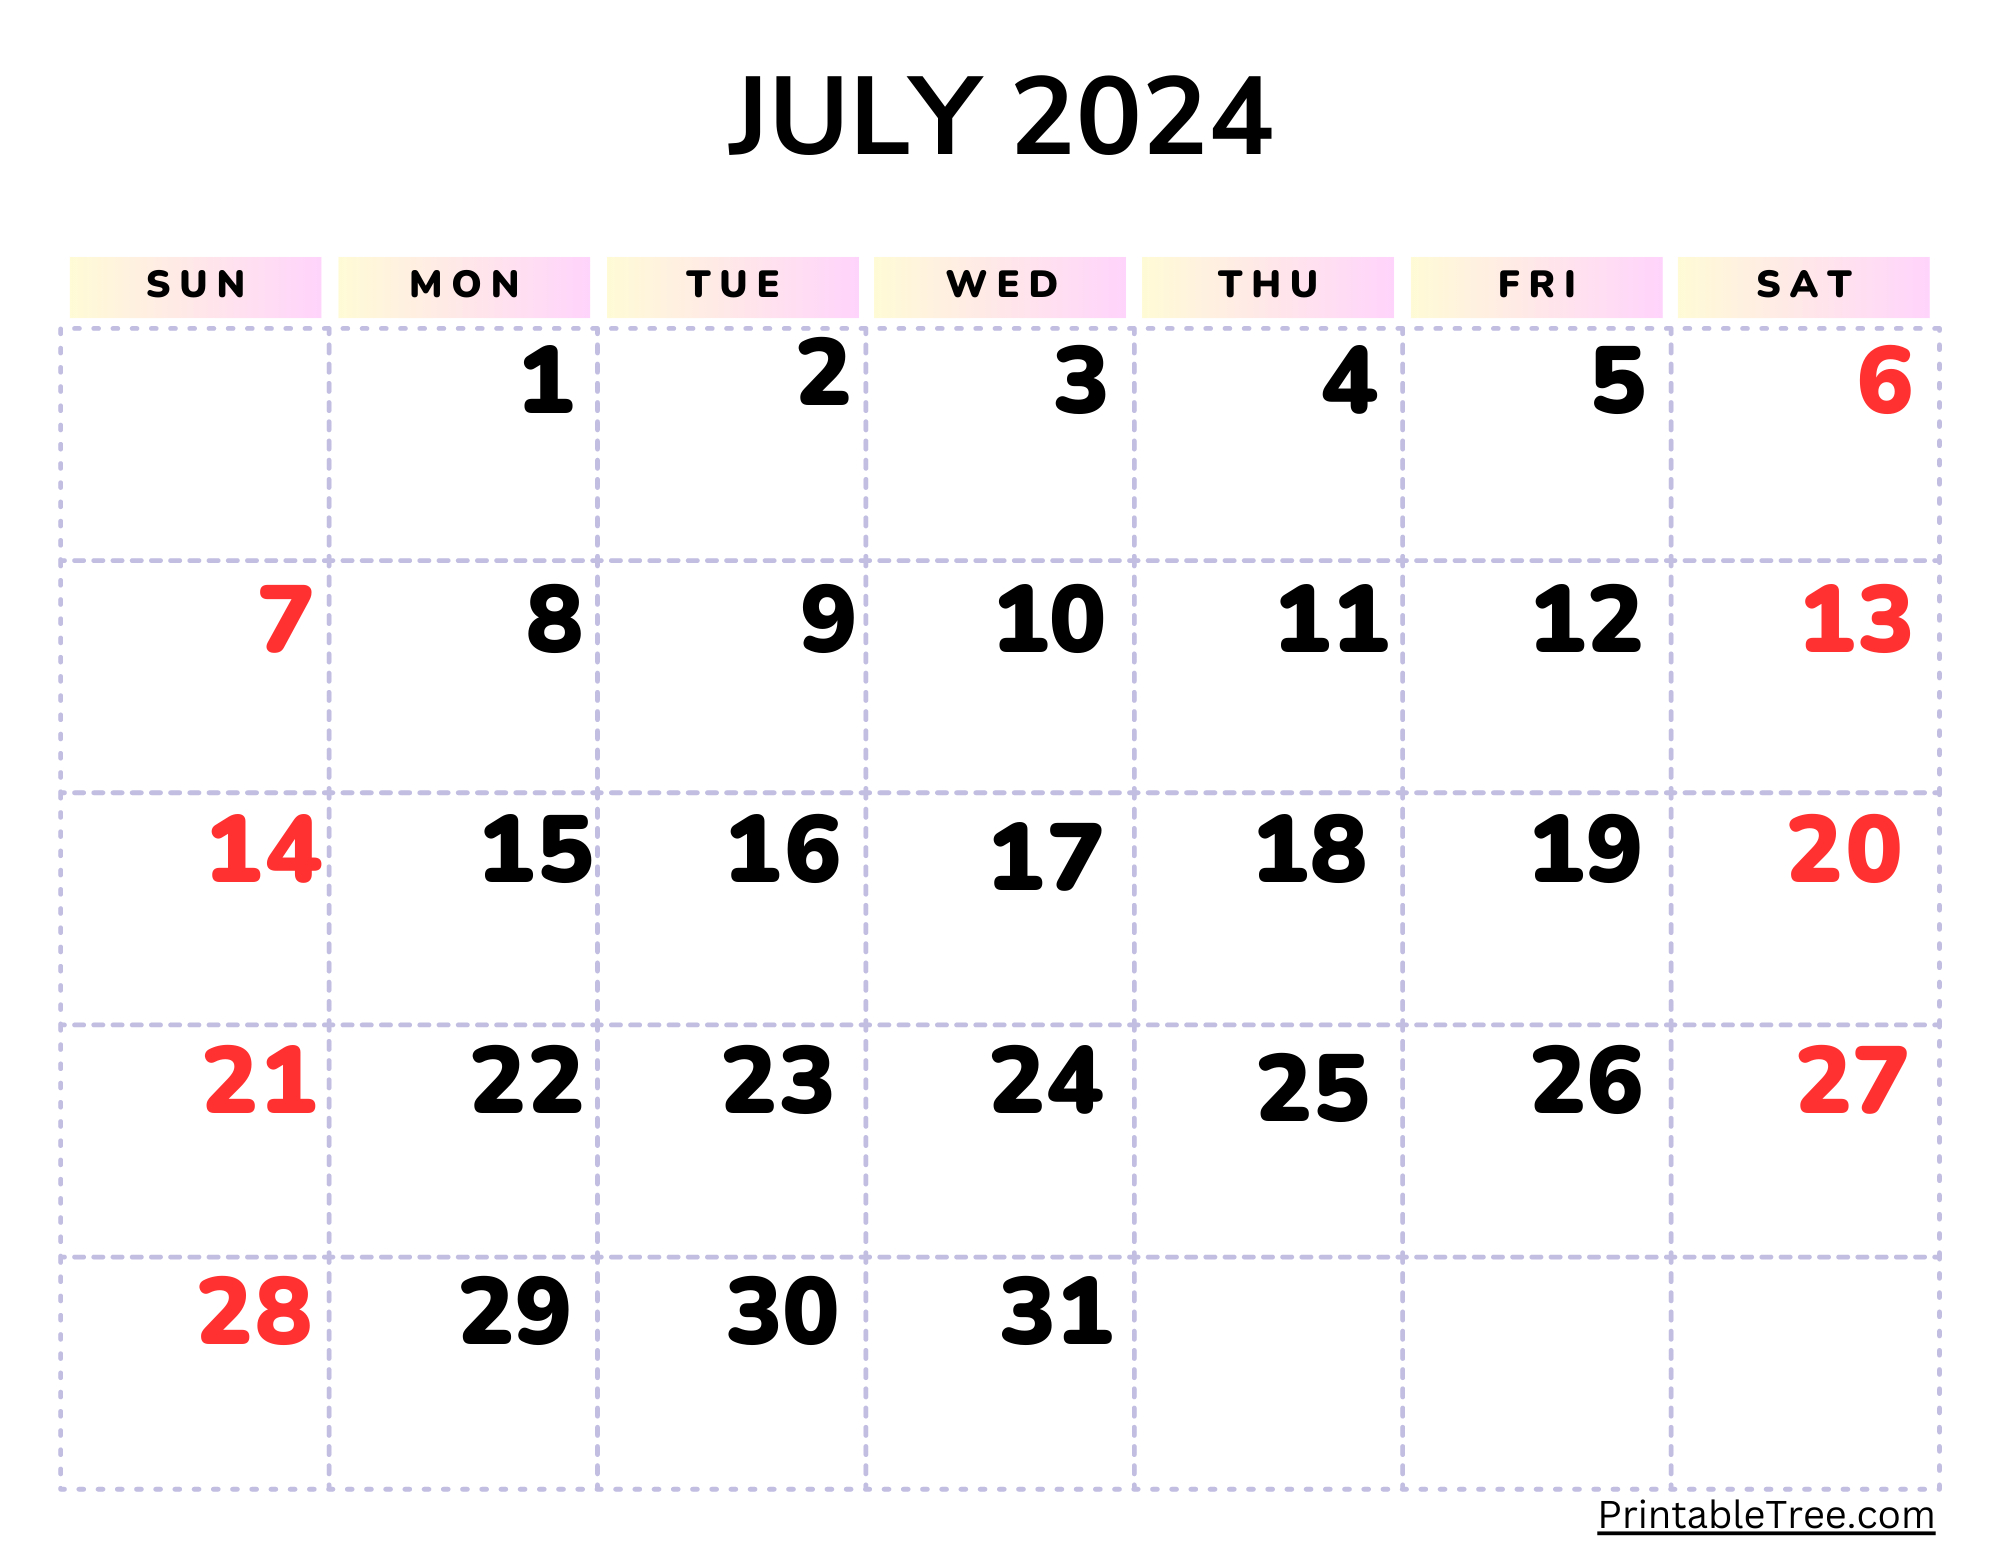 July 2024 Calendar Printable Pdf With Holidays Free Template intended for July in Roman Calendar 2024